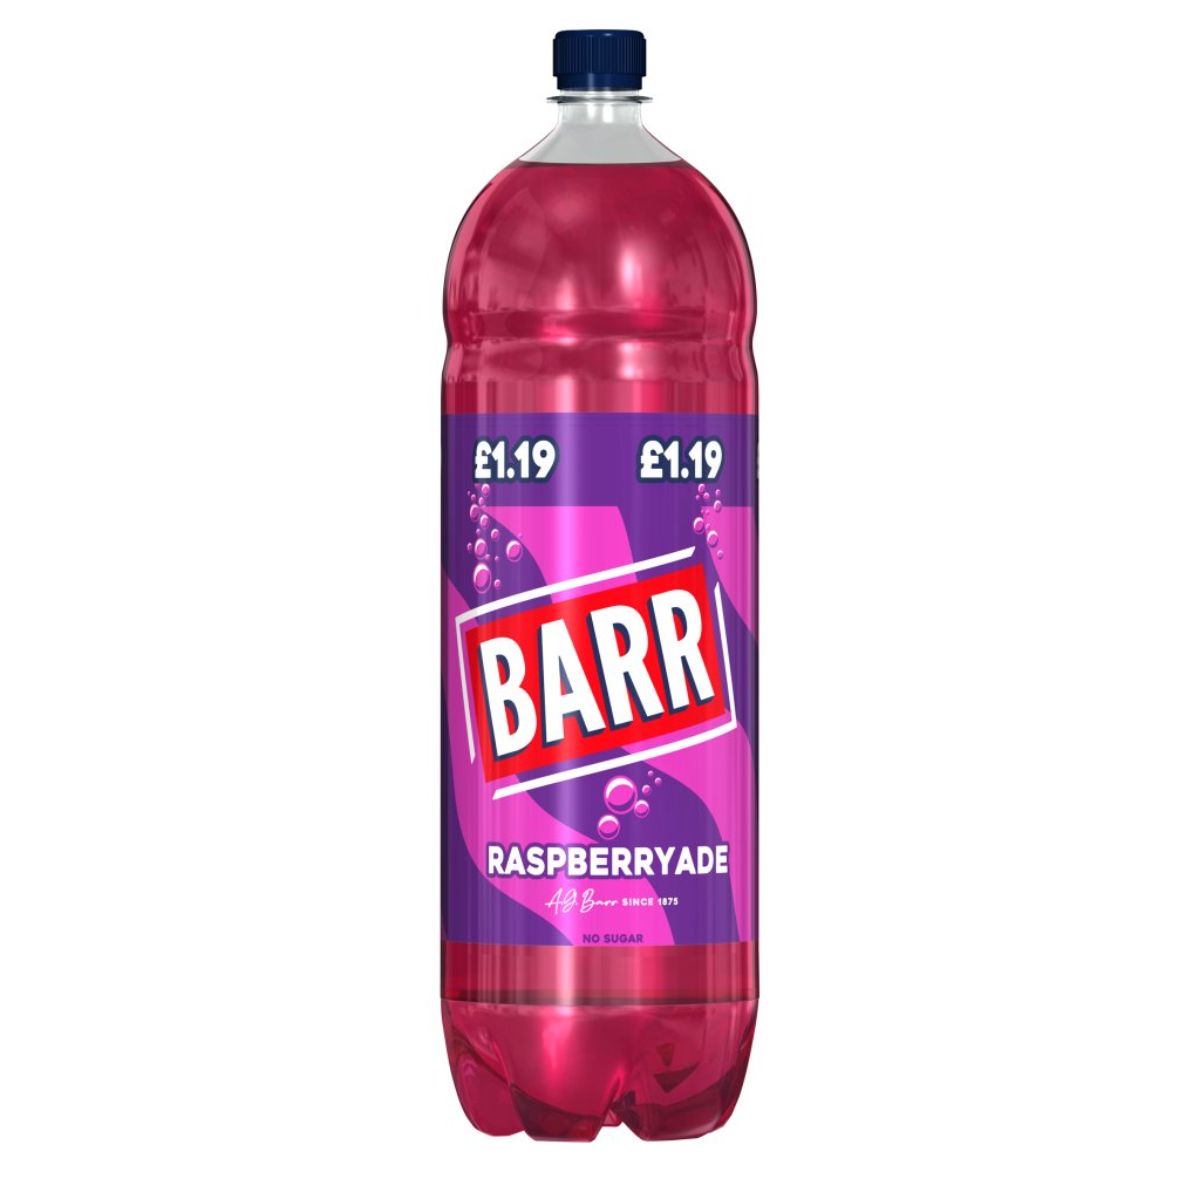 A bottle of Barr - Raspberryade - 2L on a white background.